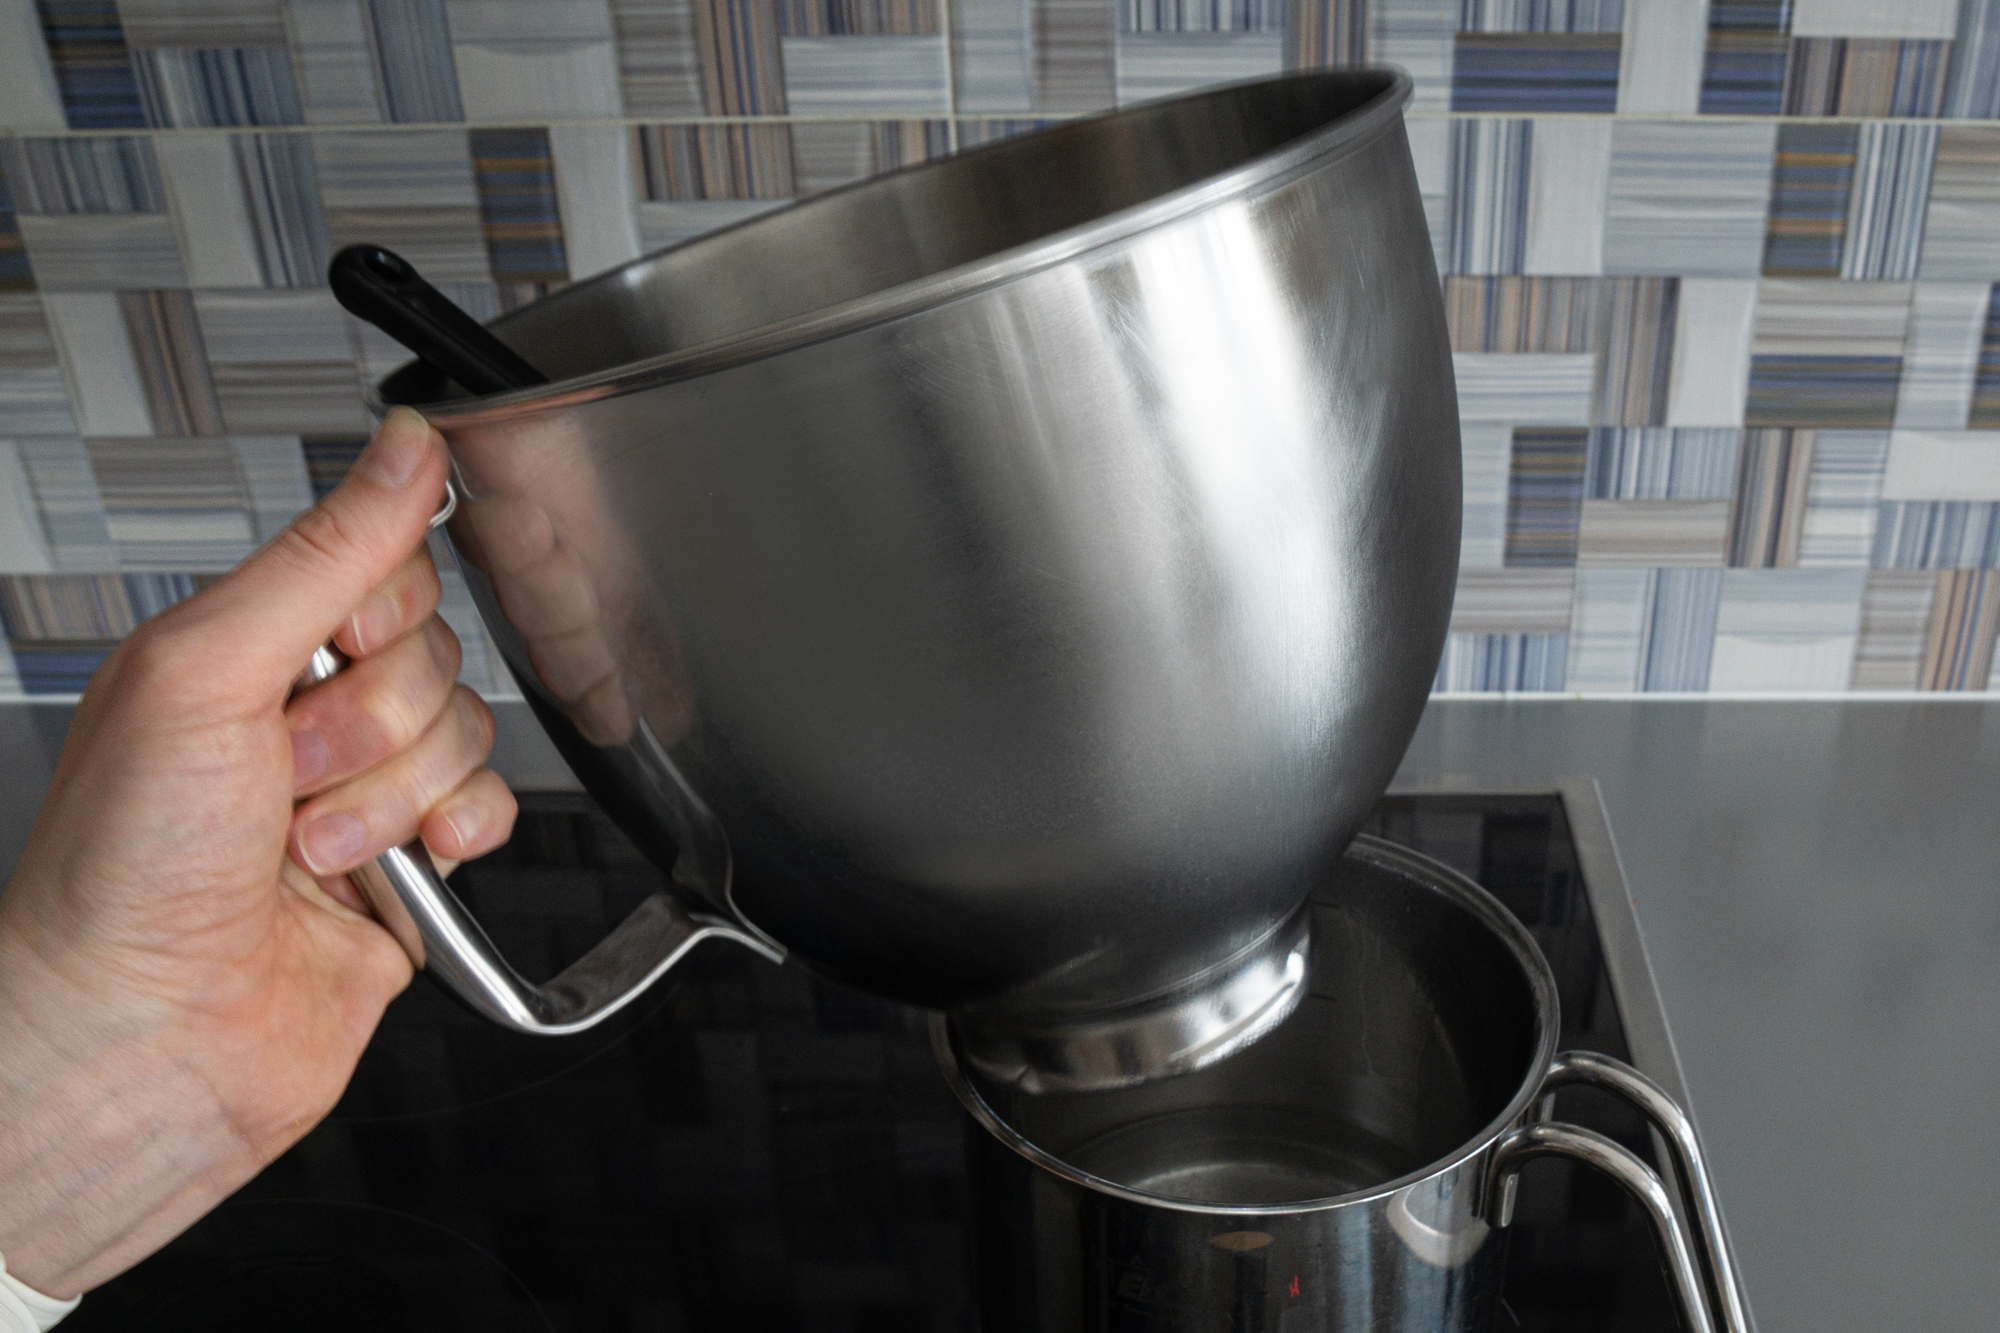 Putting a metal a bowl on a top of a saucepan with steaming water